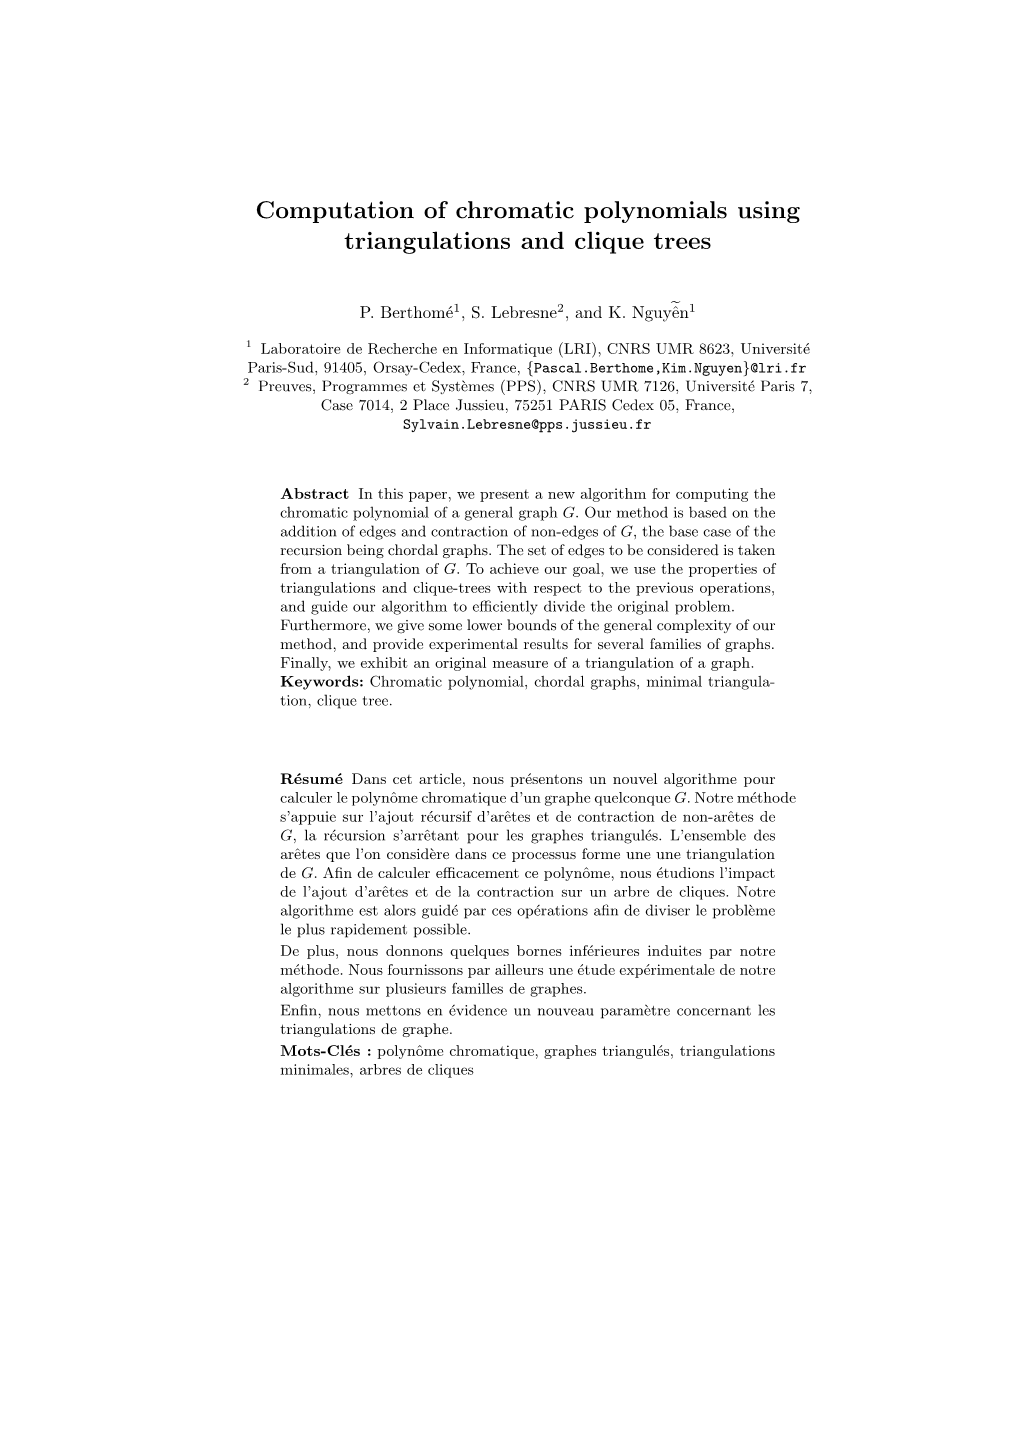 Computation of Chromatic Polynomials Using Triangulations and Clique Trees